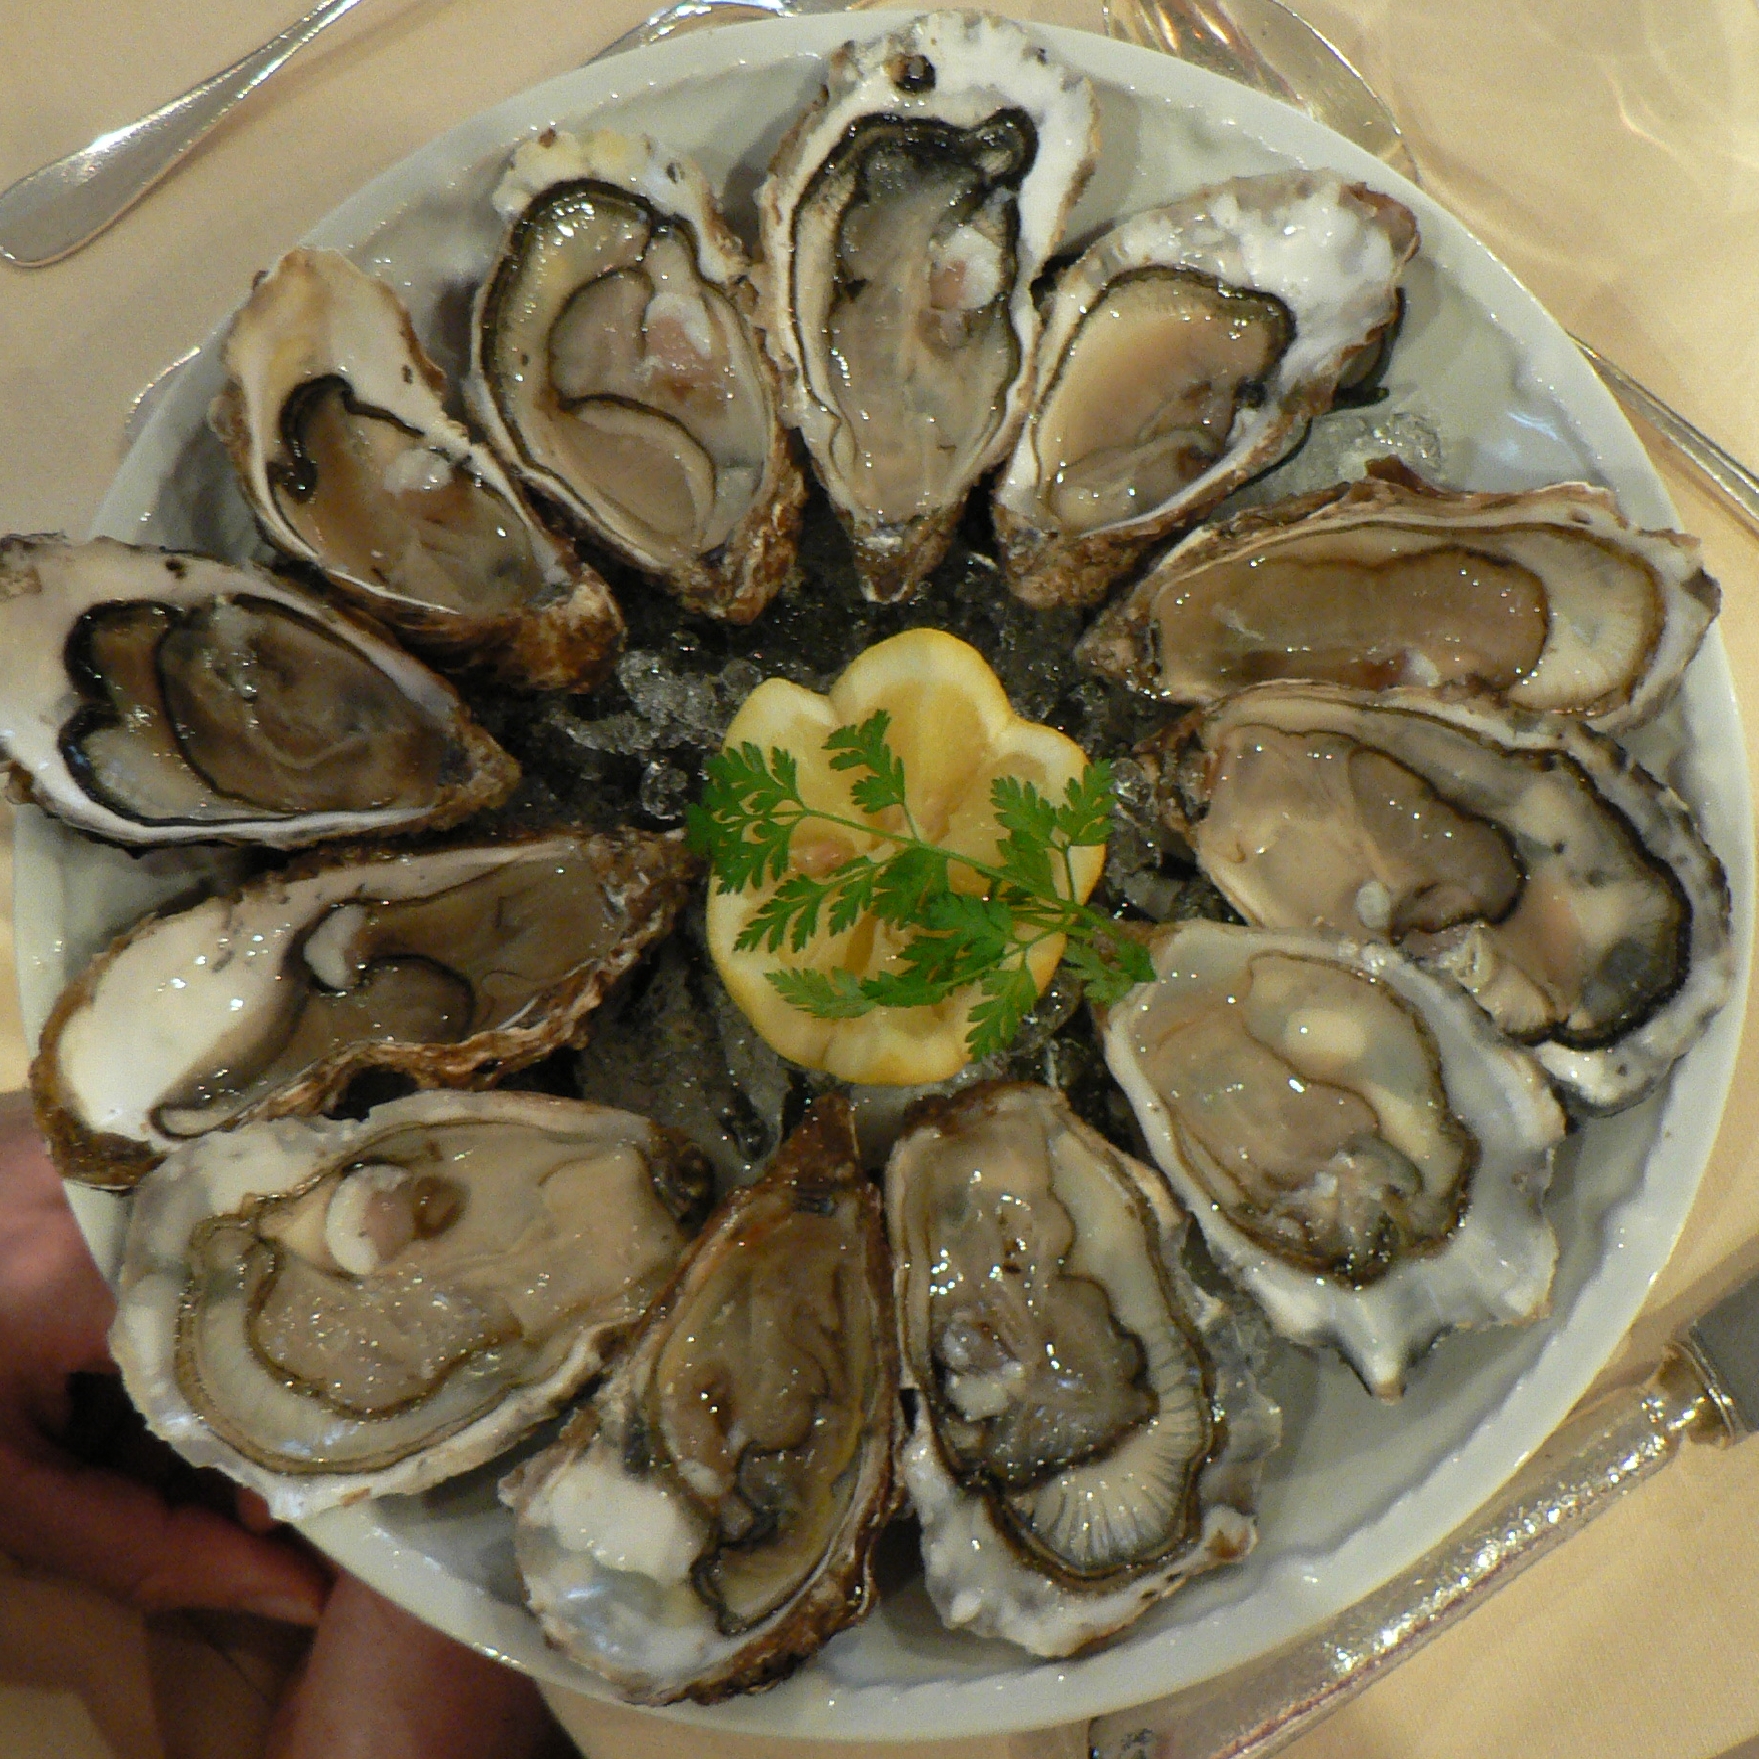 File:Oysters in circle on plate.jpg - Wikimedia Commons